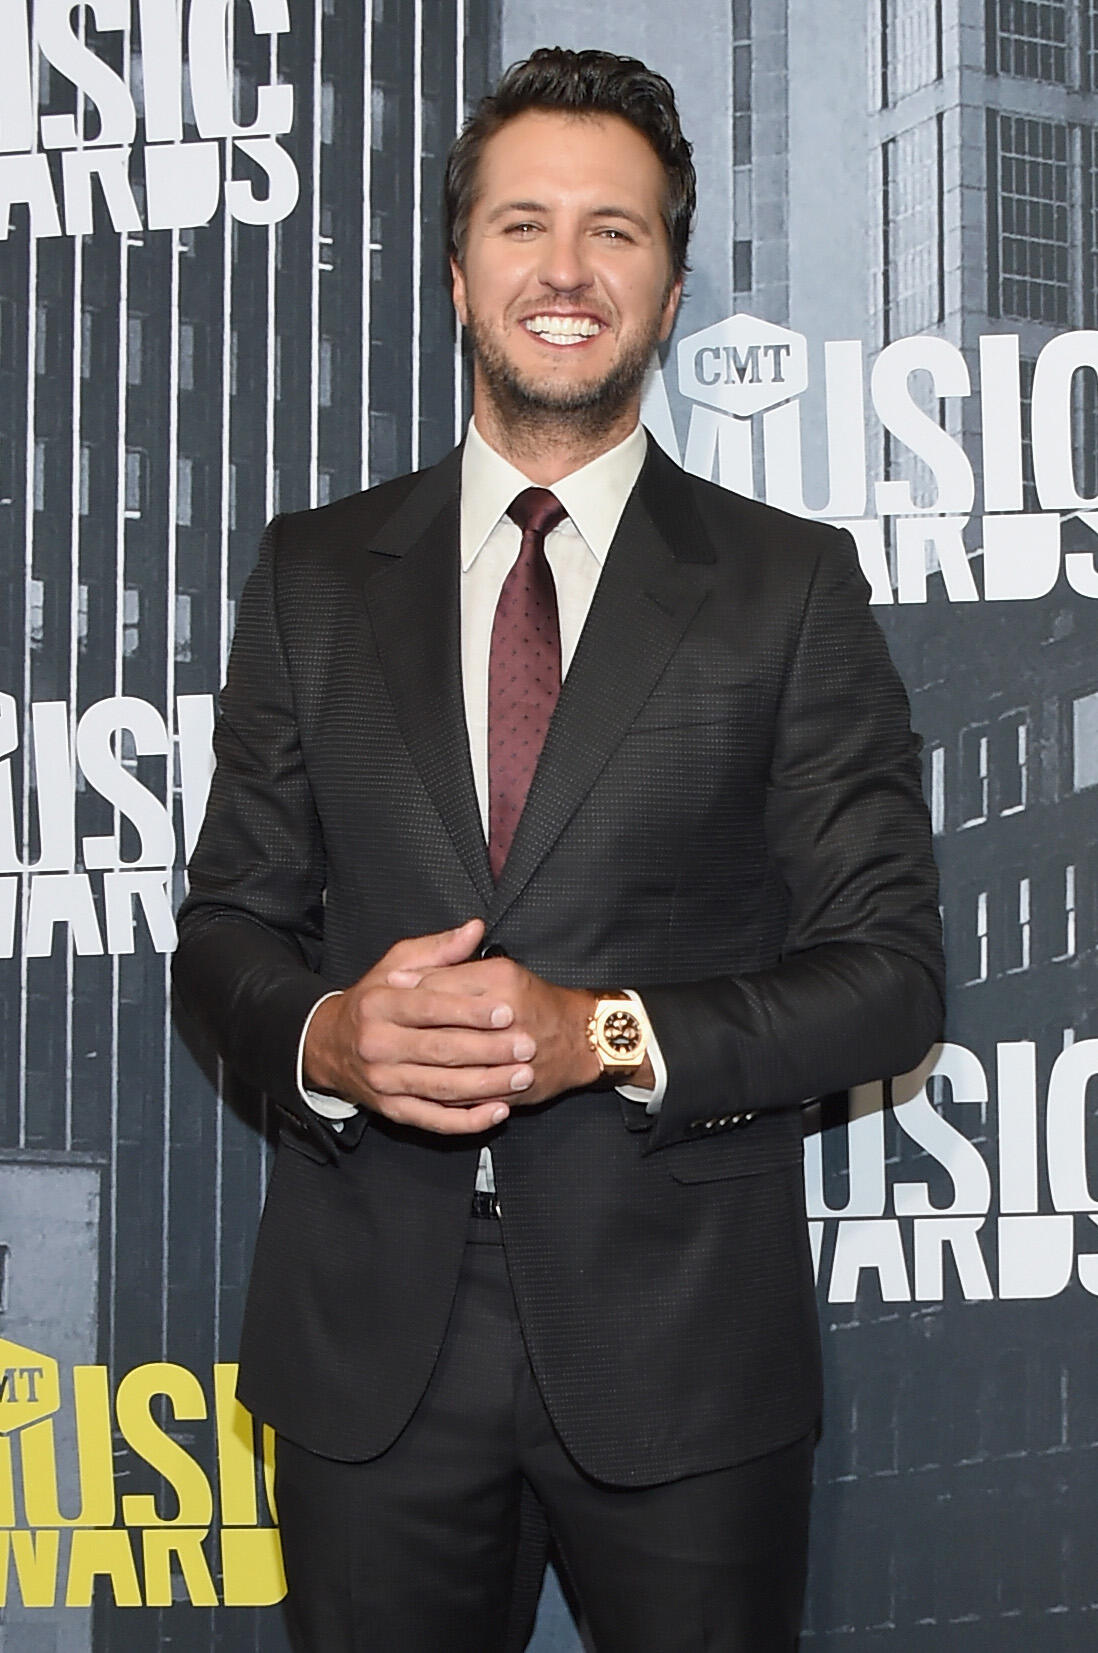 NASHVILLE, TN - JUNE 07:  Singer-songwriter Luke Bryan attends the 2017 CMT Music Awards at the Music City Center on June 7, 2017 in Nashville, Tennessee.  (Photo by Michael Loccisano/Getty Images For CMT)